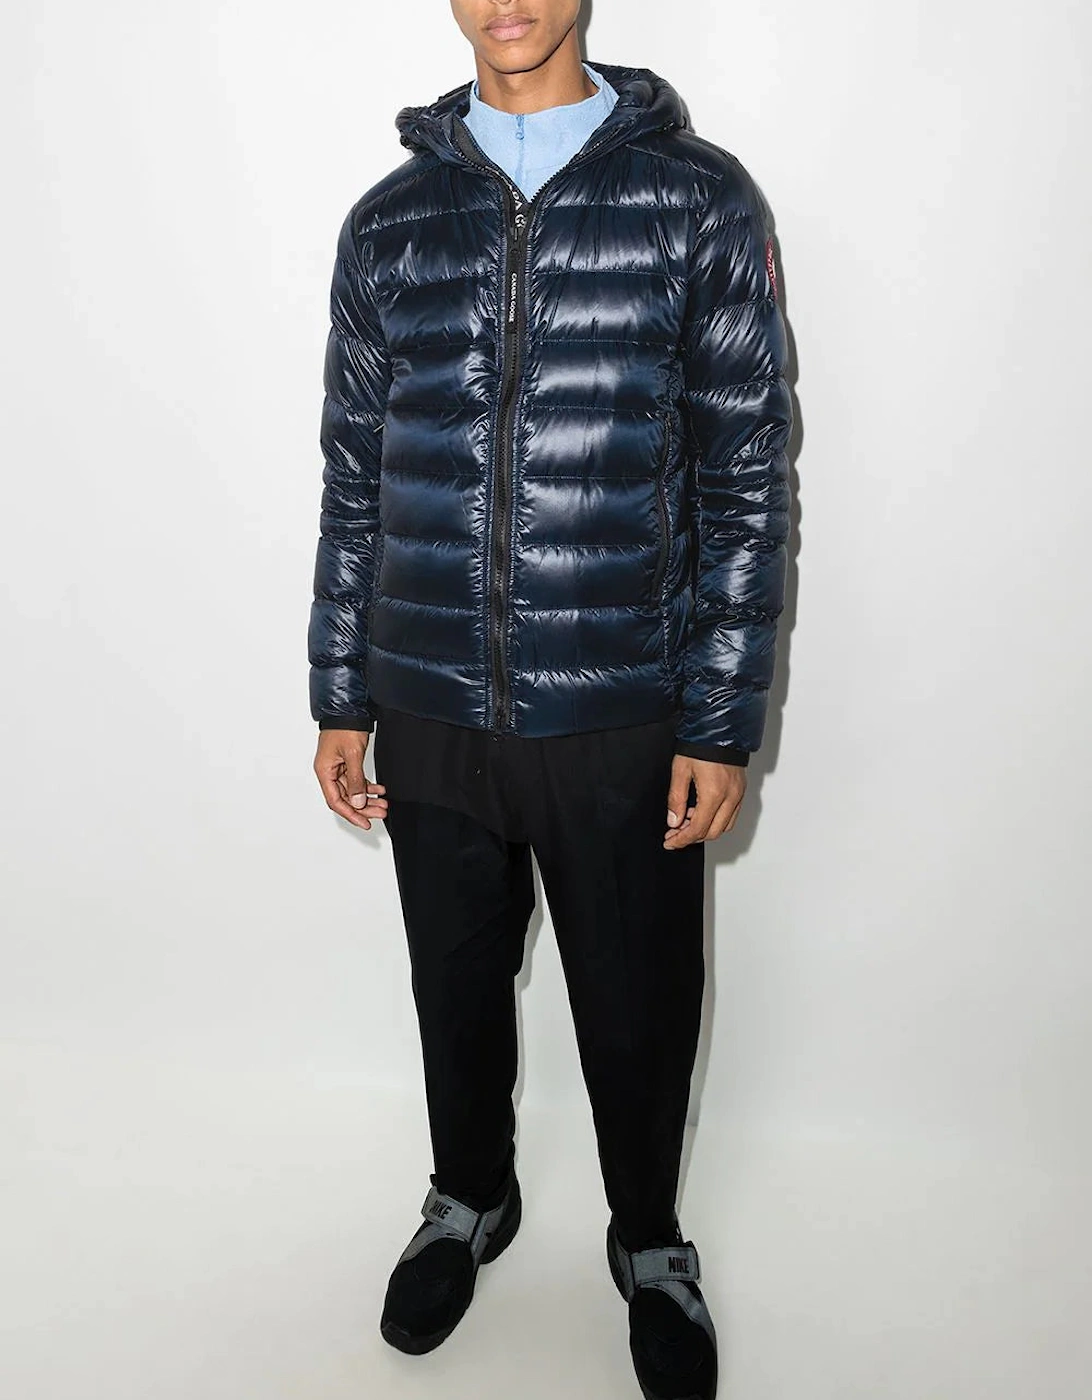 Crofton Padded Down Hooded Jacket in Navy